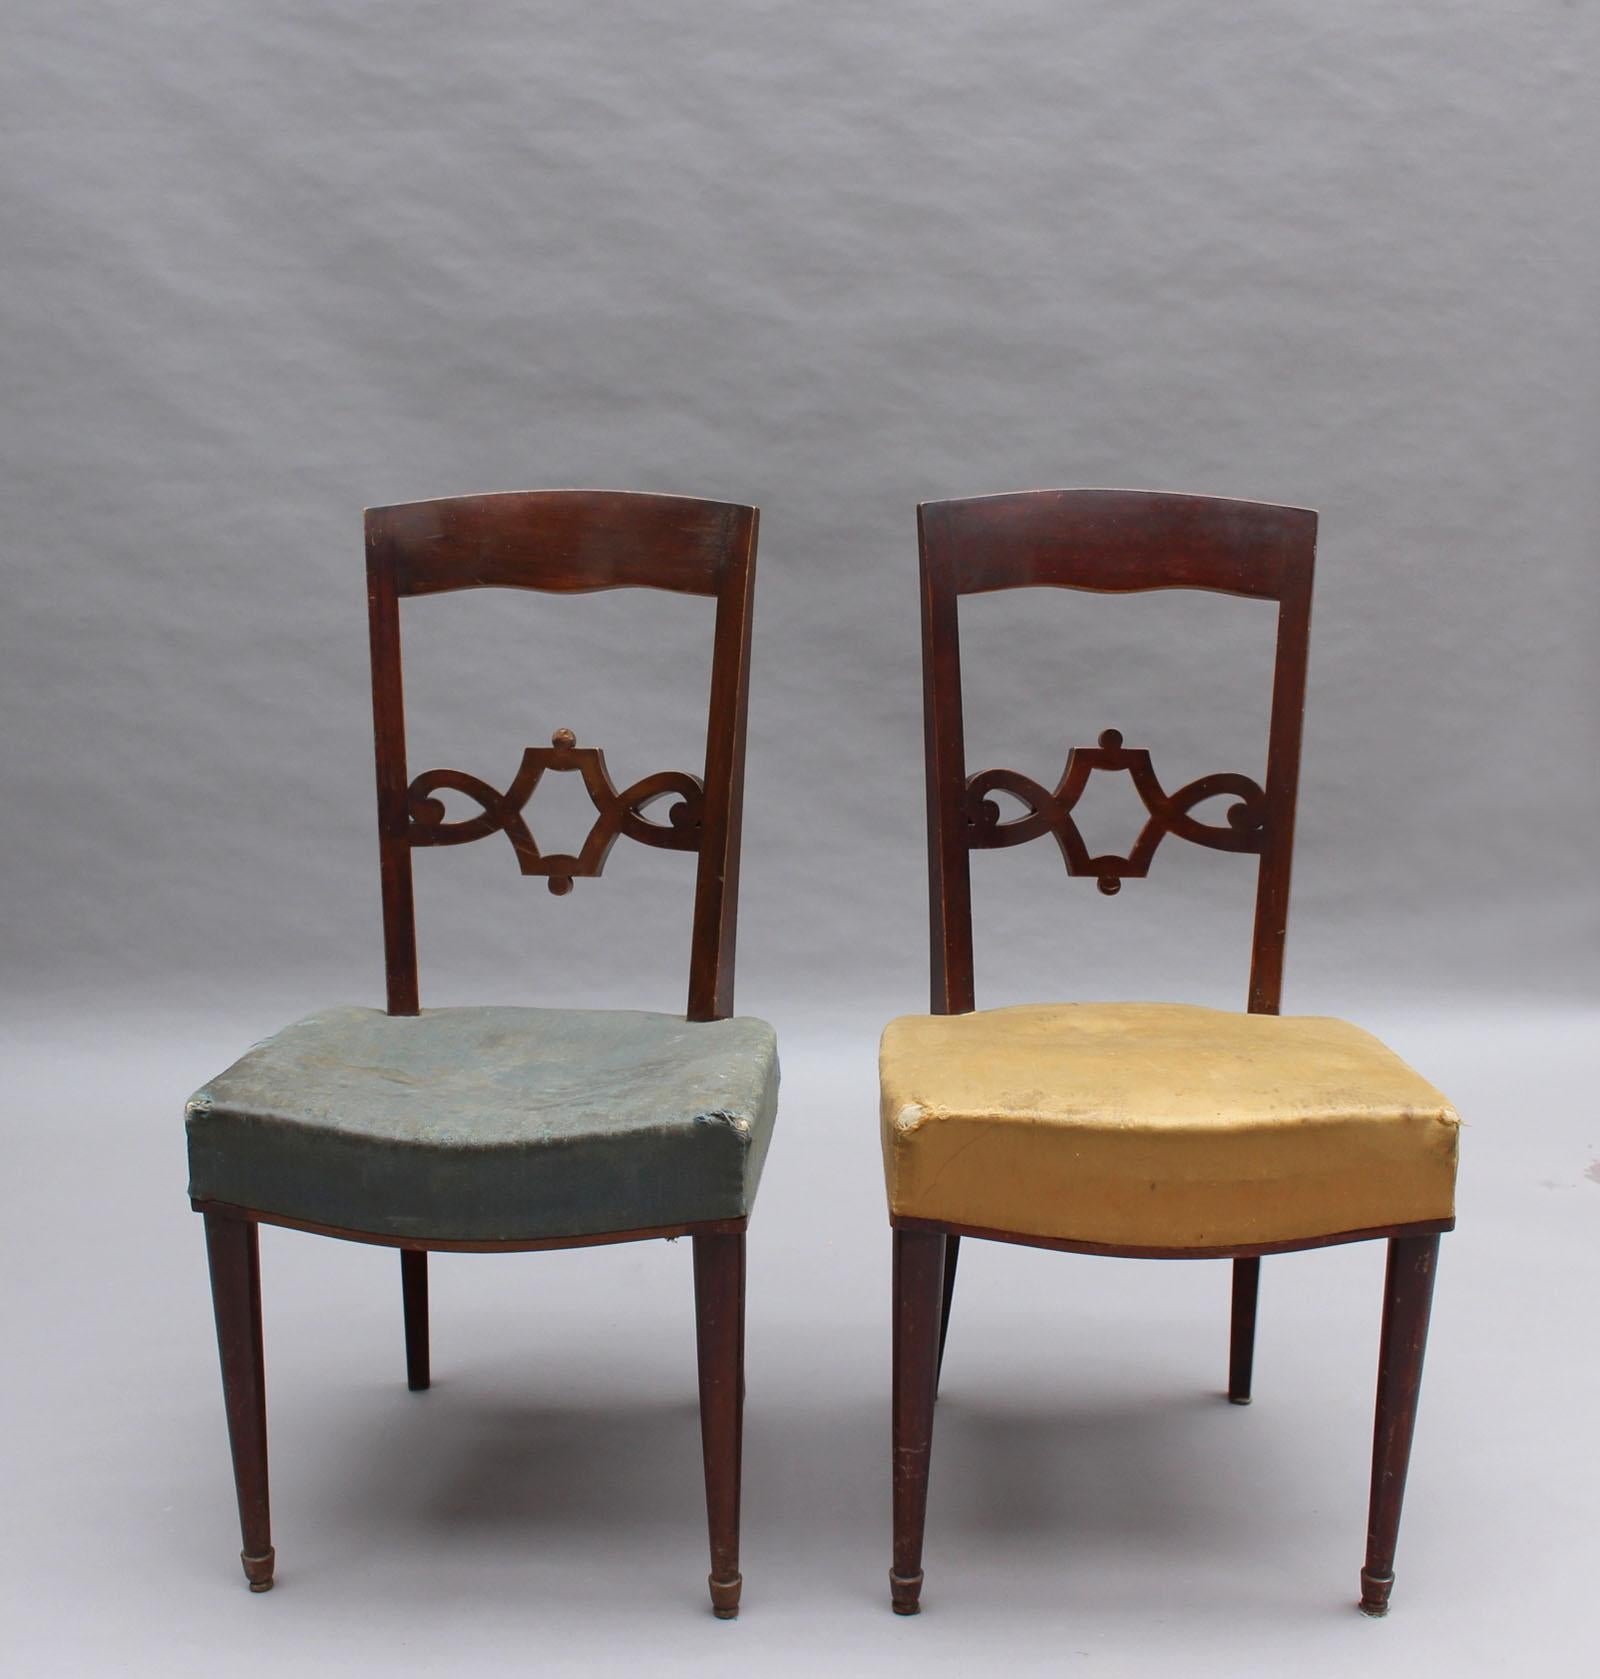 Jules Leleu- A pair of fine French 1940s mahogany chairs with intertwining curved wood backs

Numbered: 21956 & 21957

For an illustration of a similar armchair, see Siriex, Francoise. The House of Leleu. New York: Hudson Hills Press, 2008. page